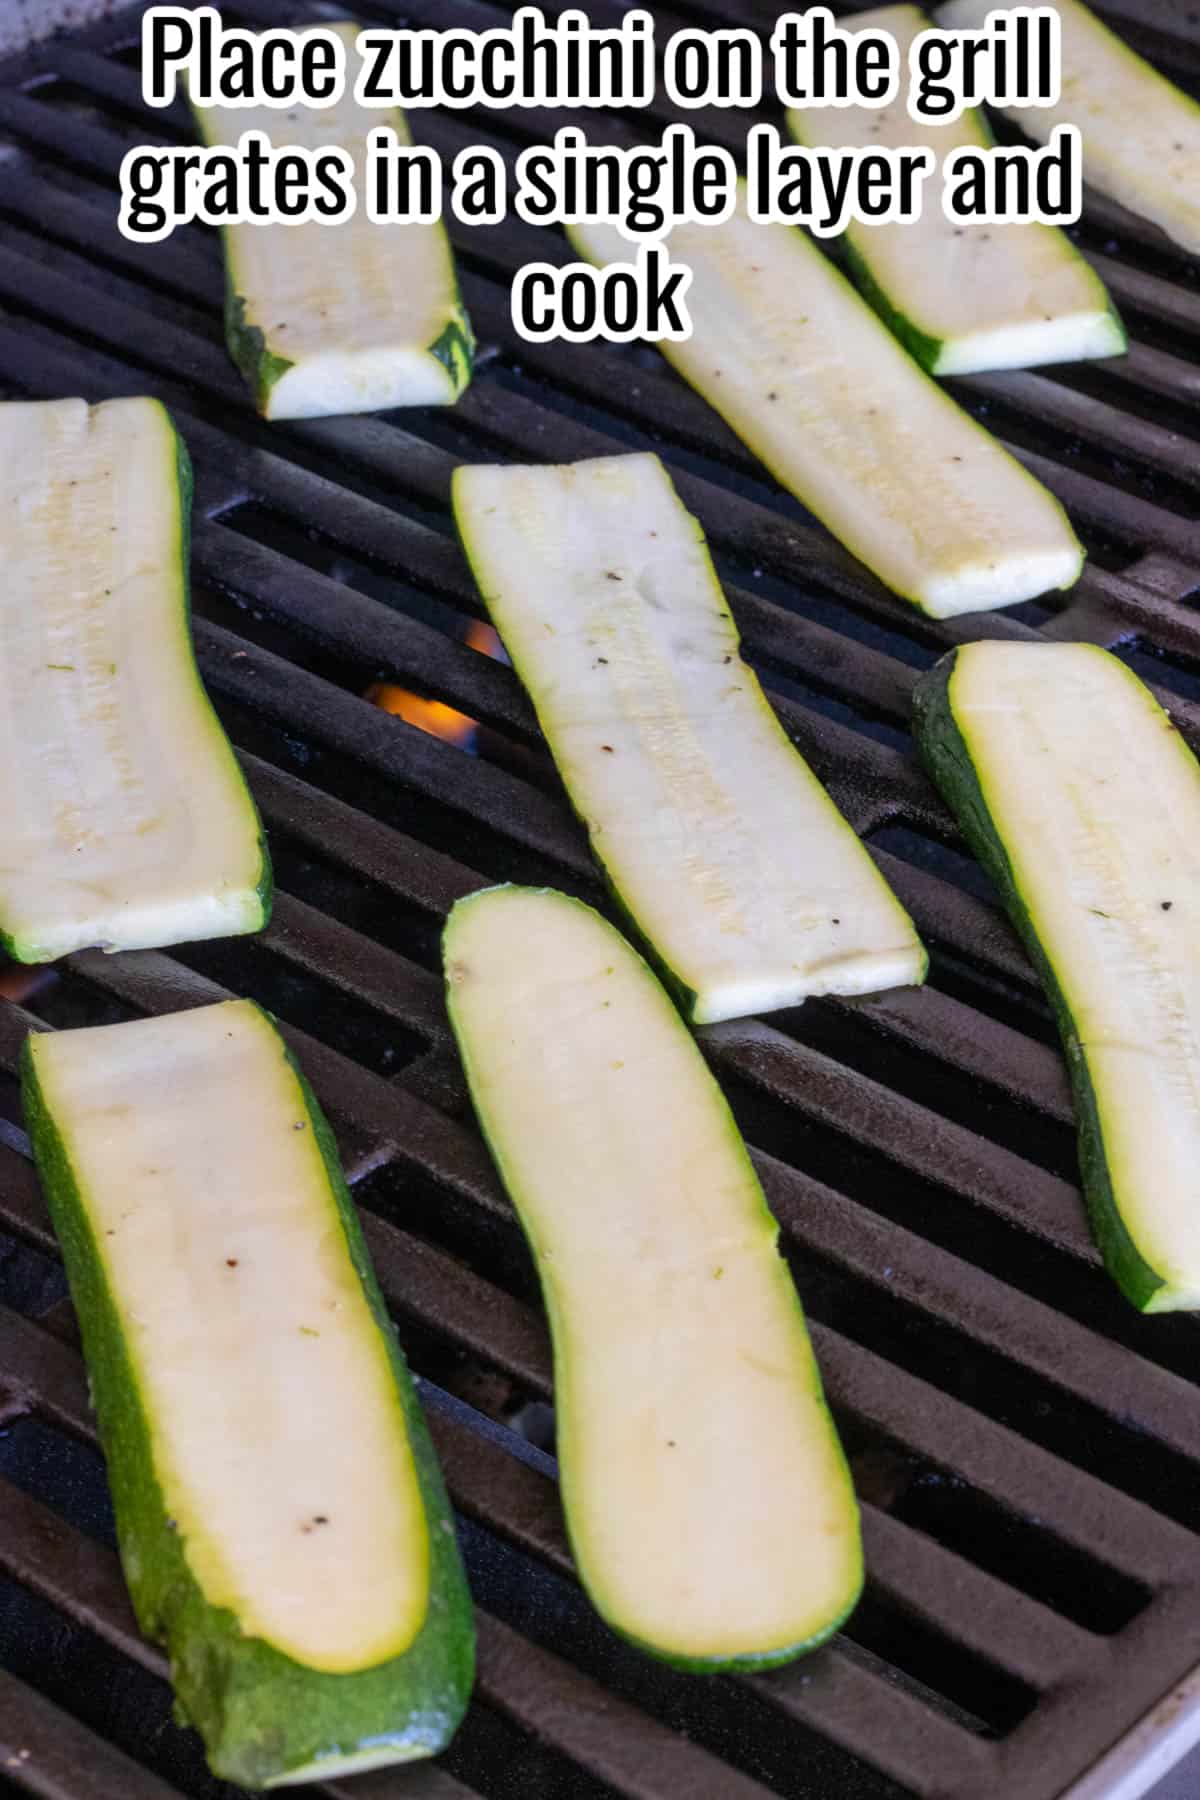 Zucchini slices on a grill.